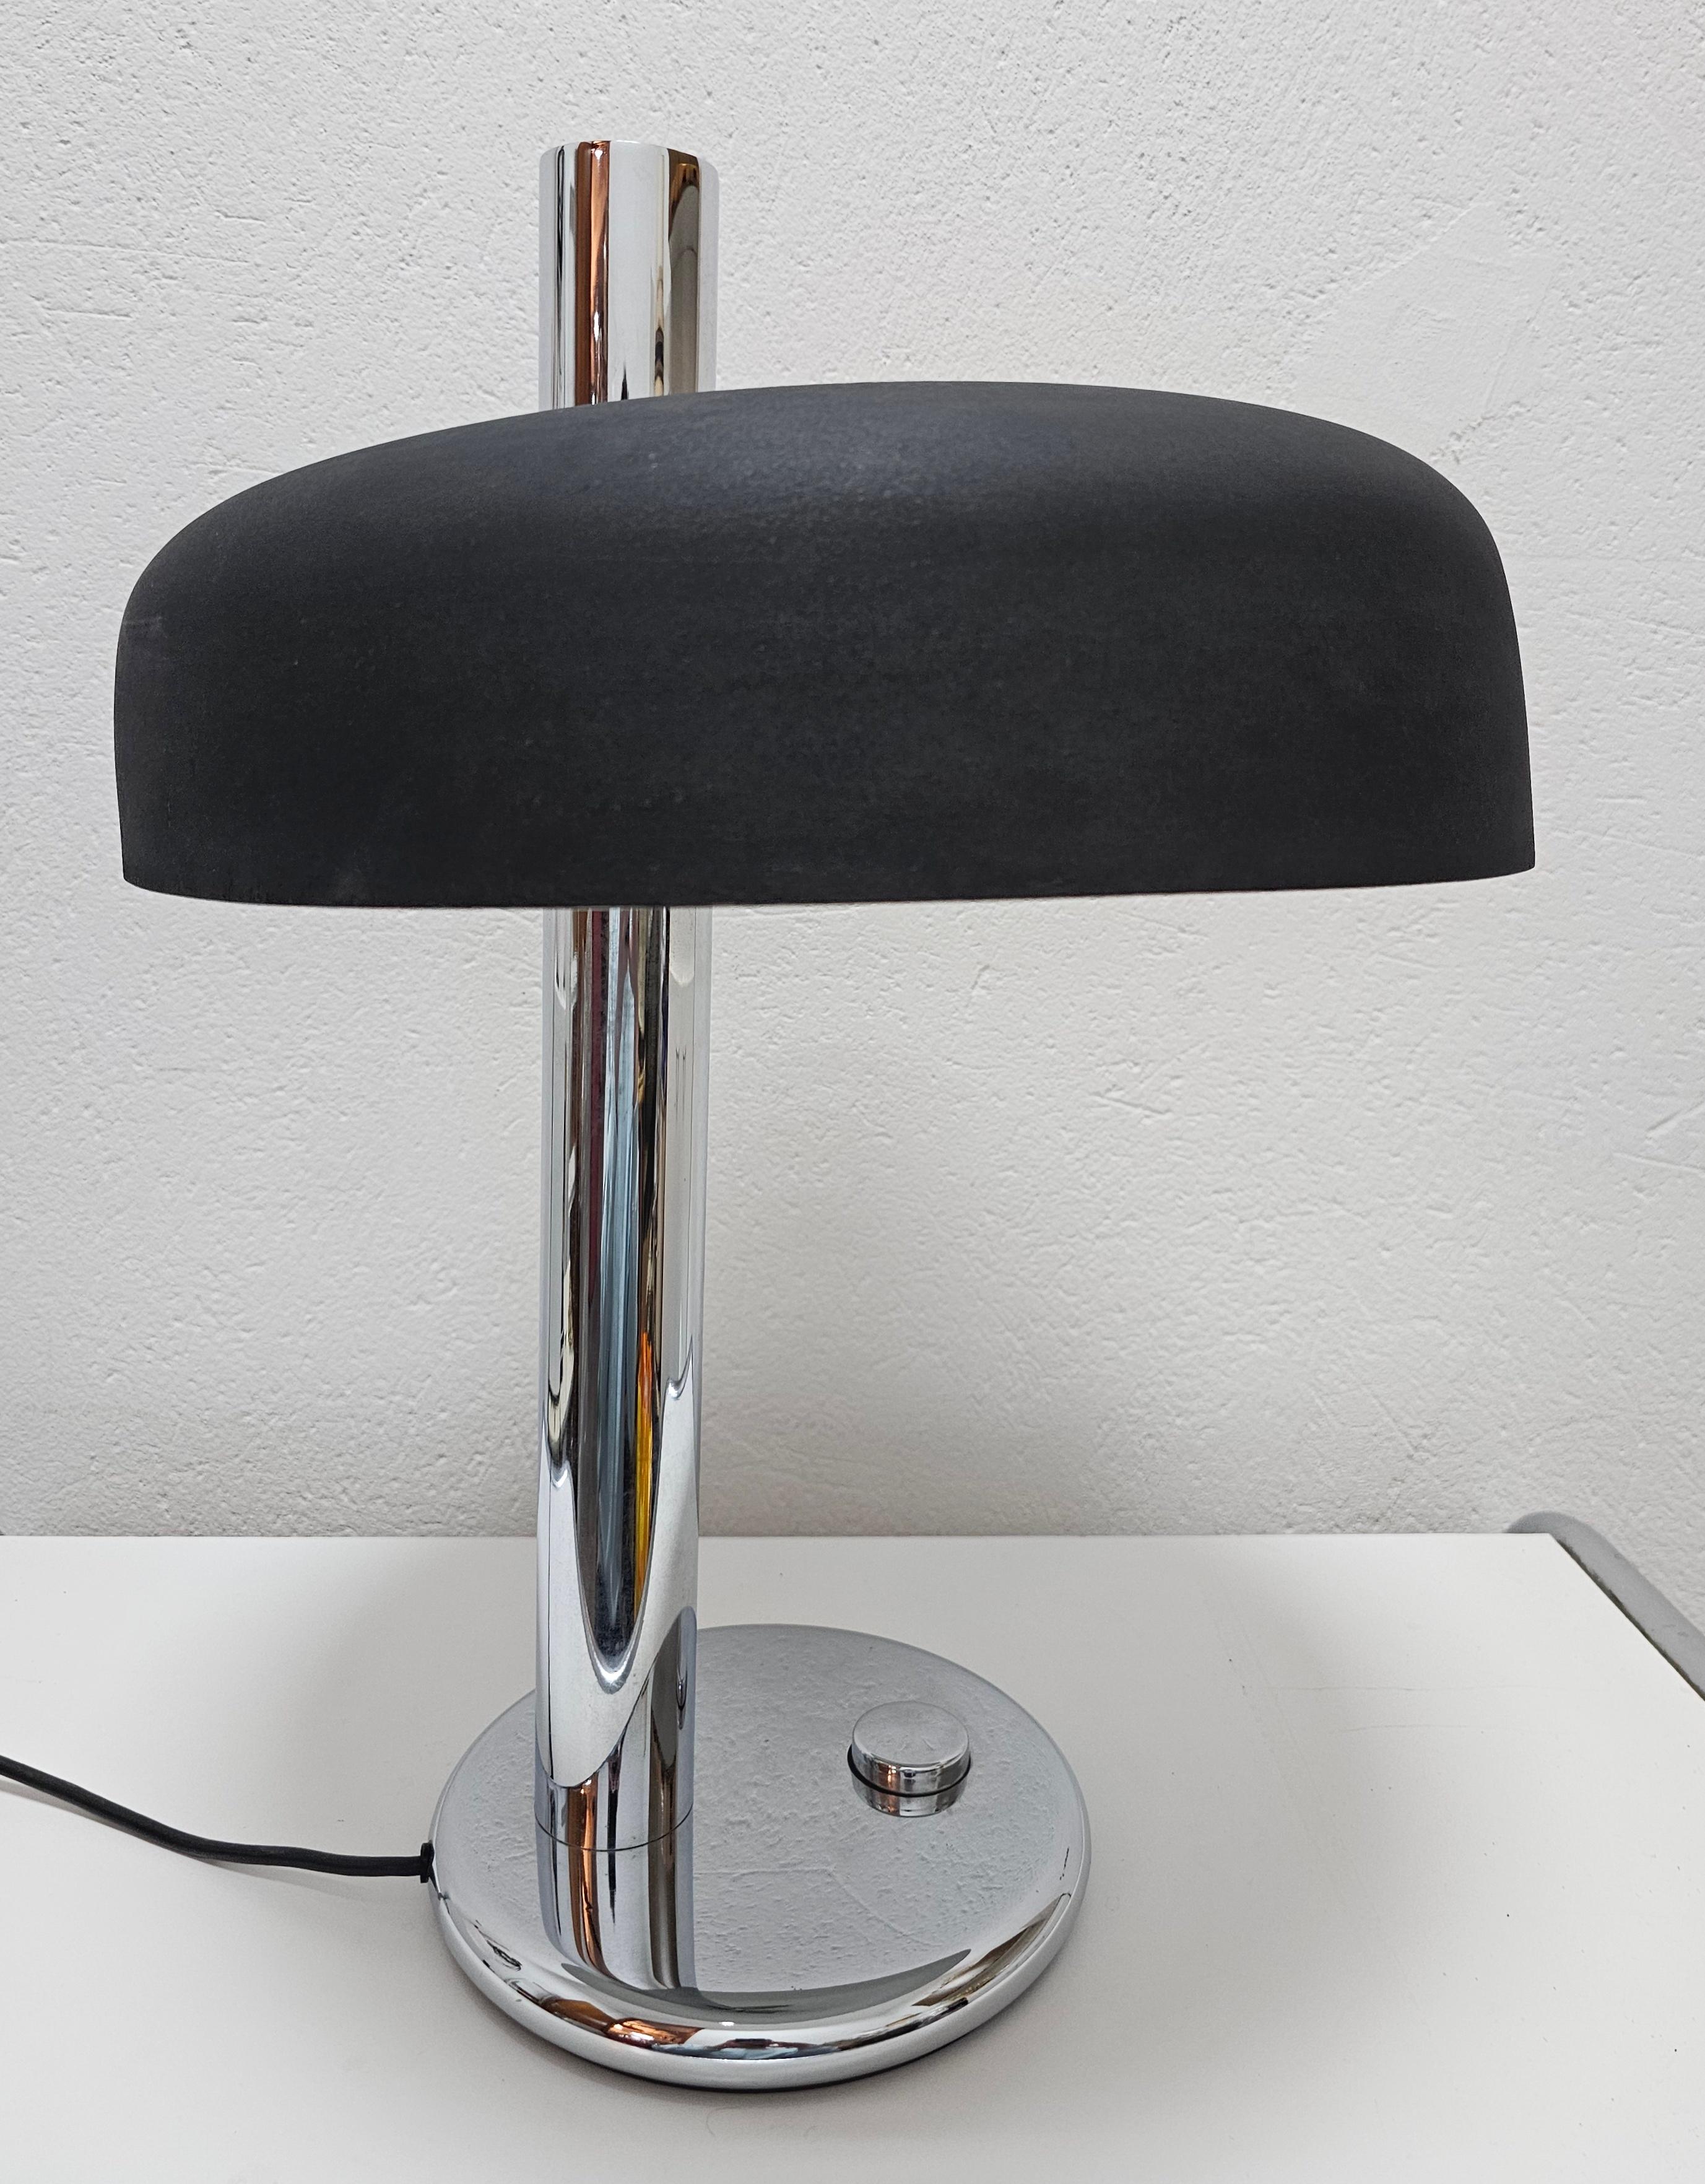 German Bauhaus Style Table Lamp Model 7603 designed by Heinz Pfaender for Hillebrand  For Sale